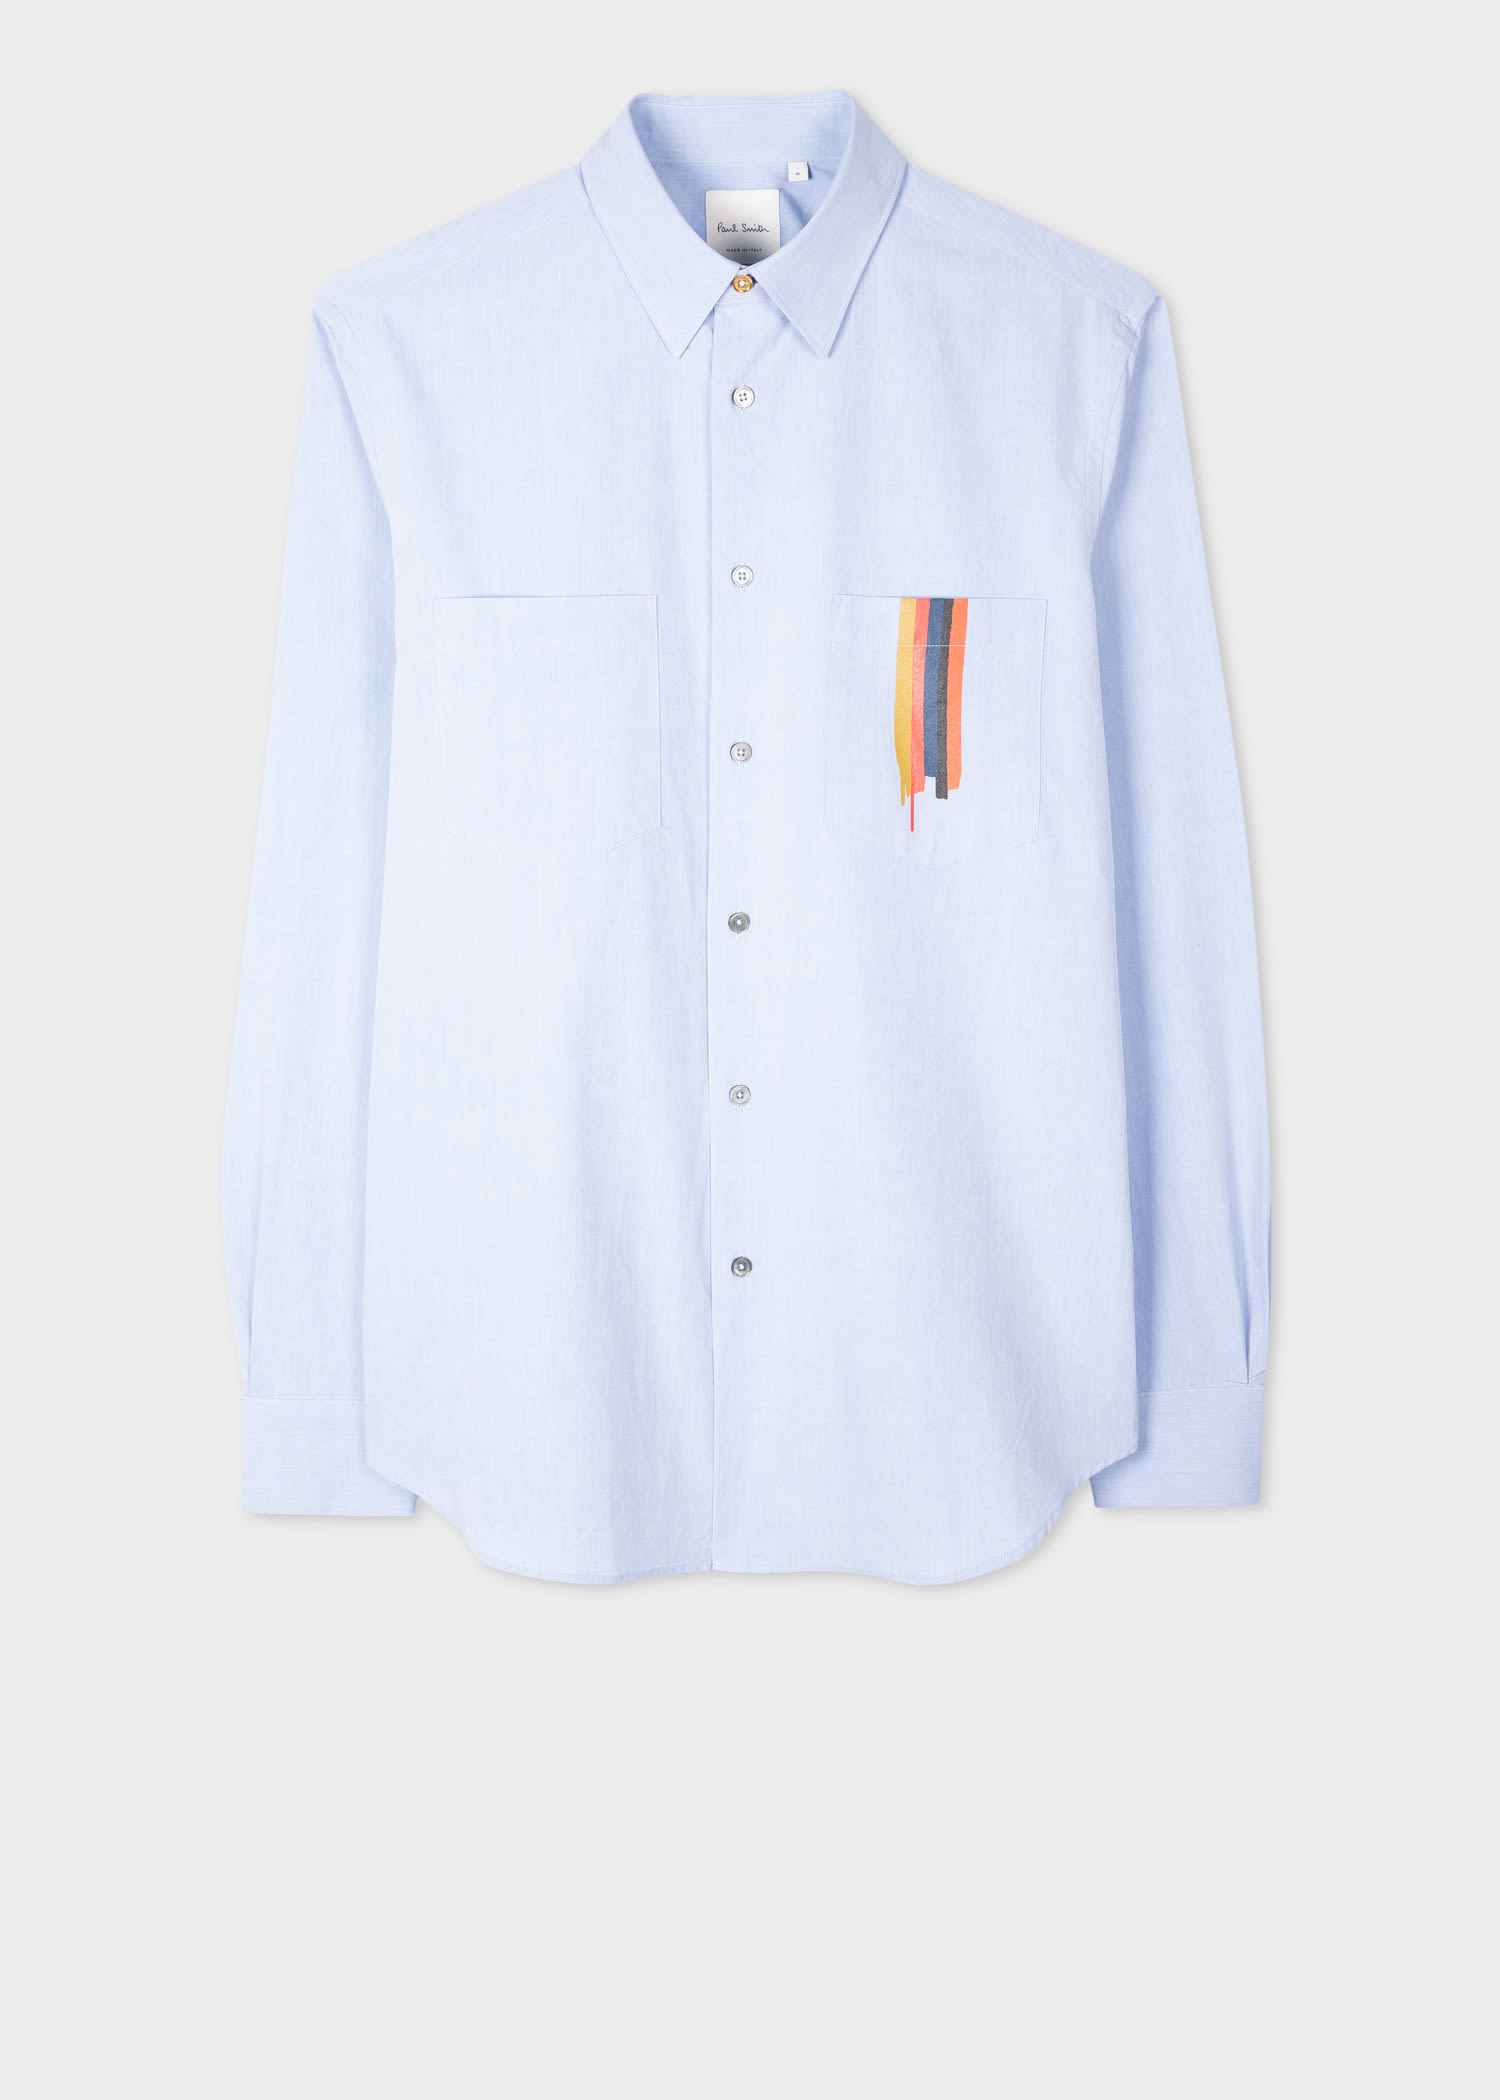 Search results for: 'shirt' - Paul Smith Europe